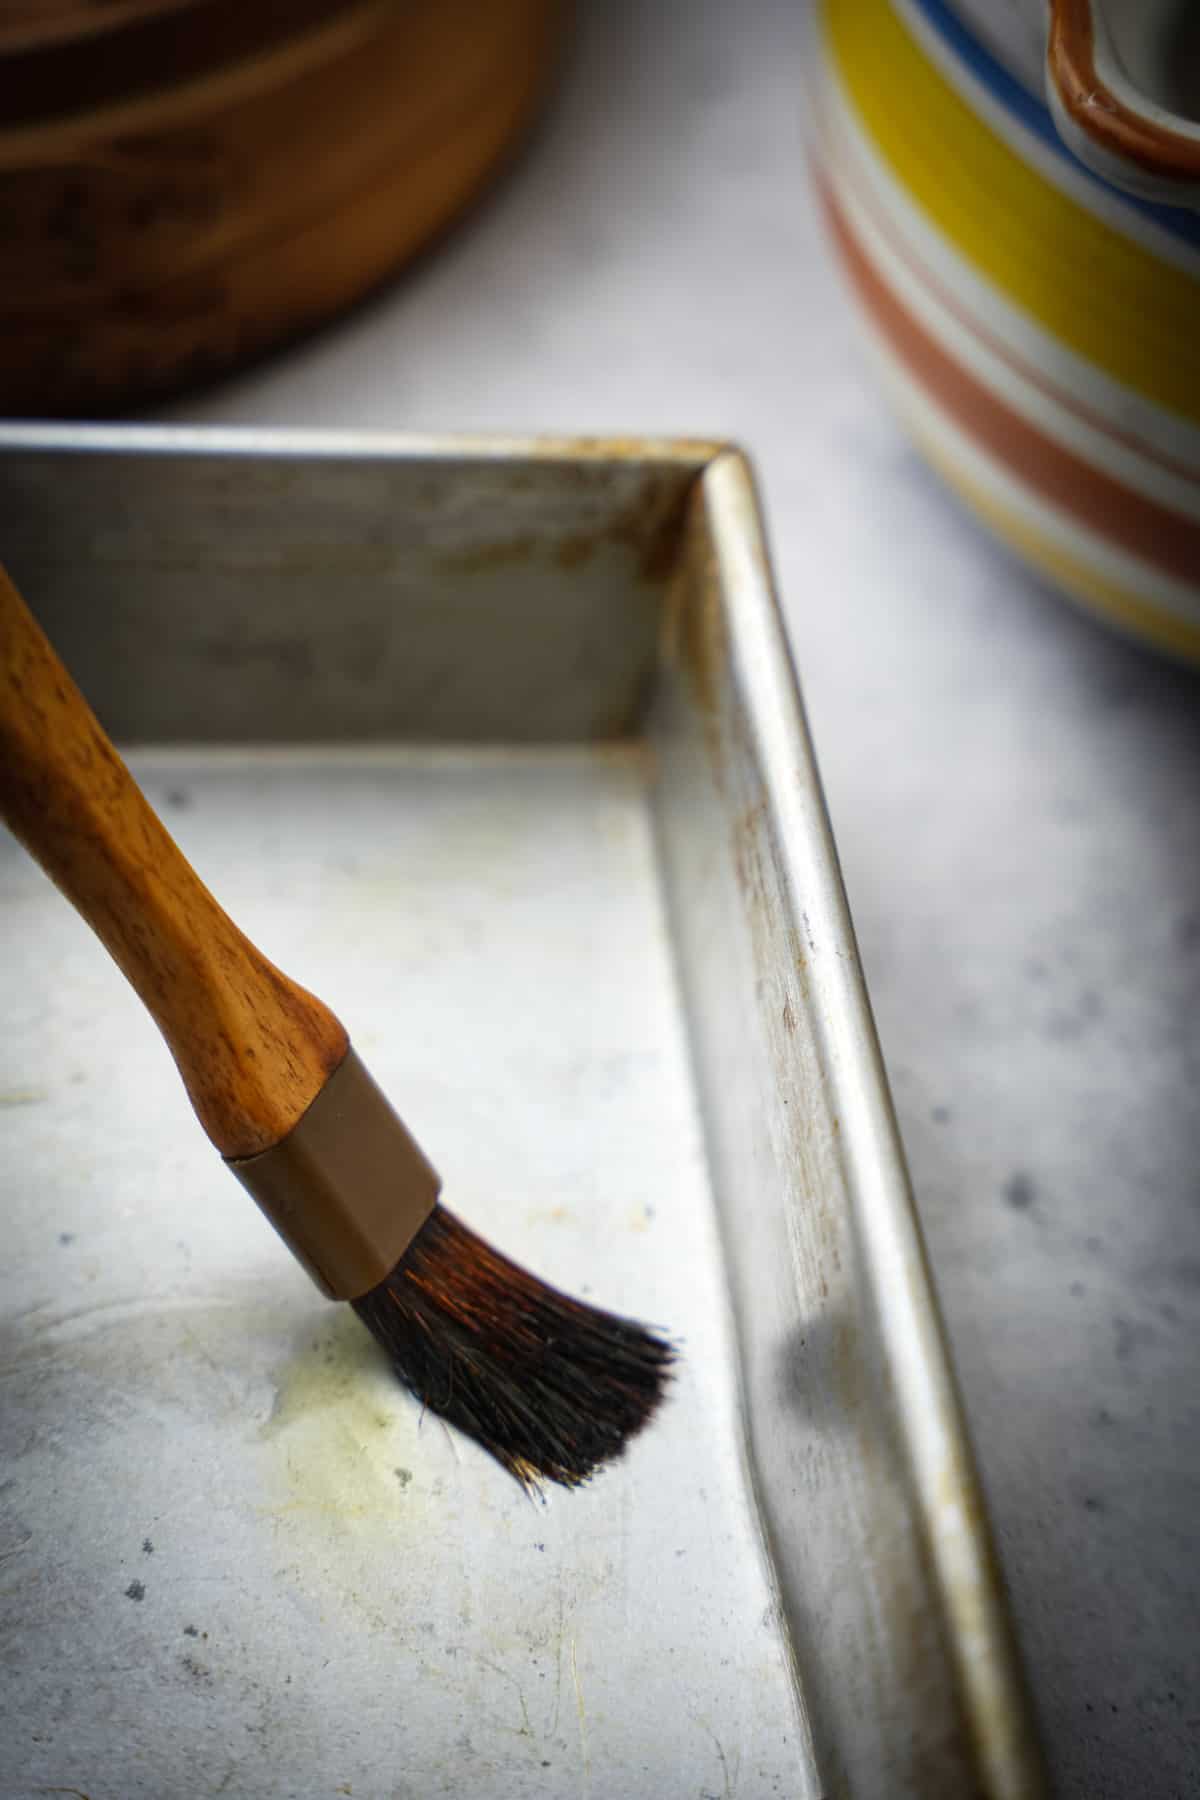 Preparing the pan to steam the batter in by brushing it with oil.